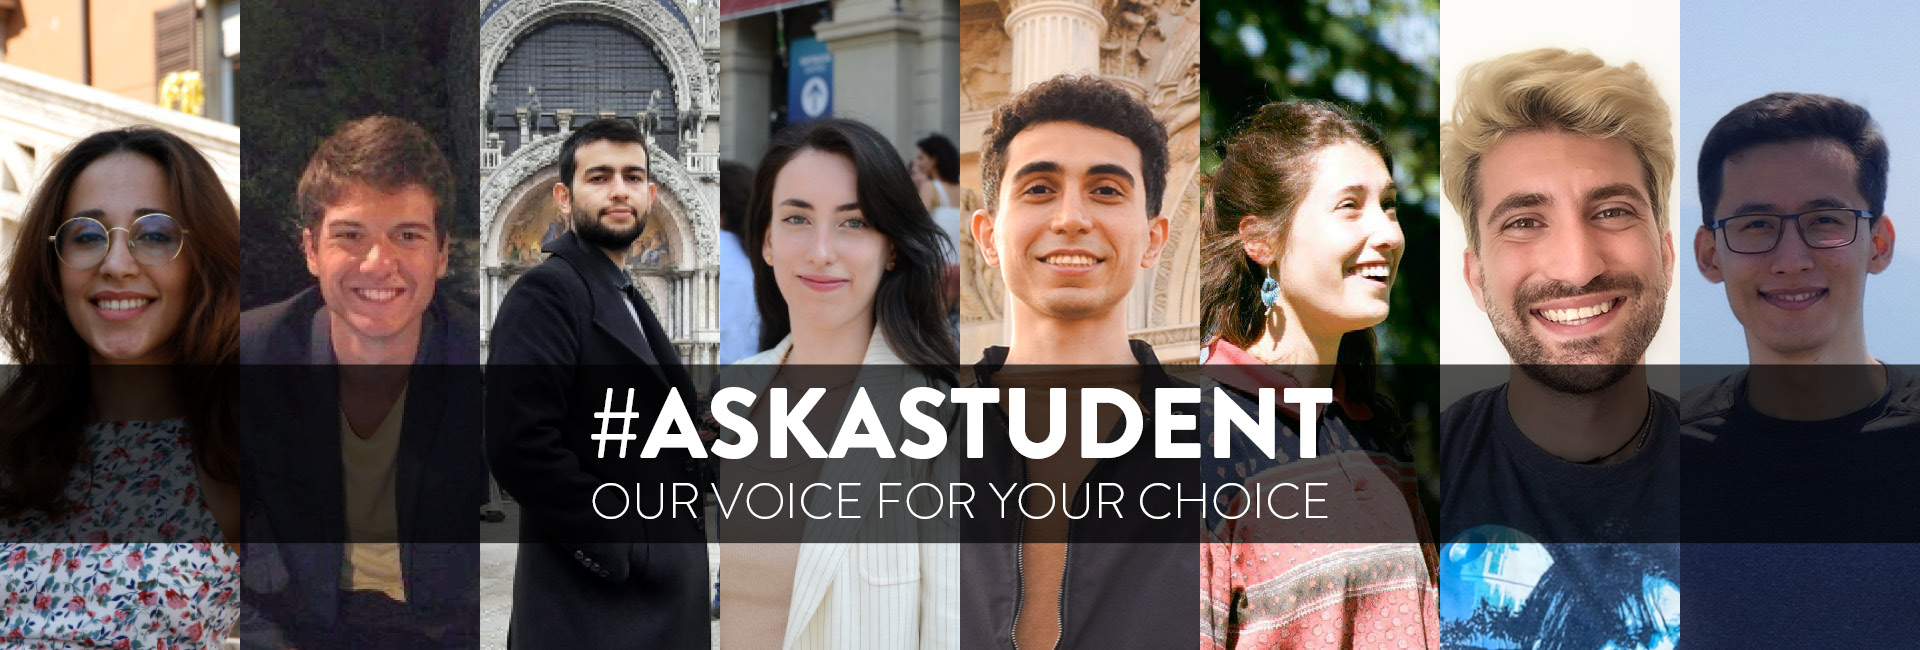 #ASKASTUDENT - Our Voice for your Choice